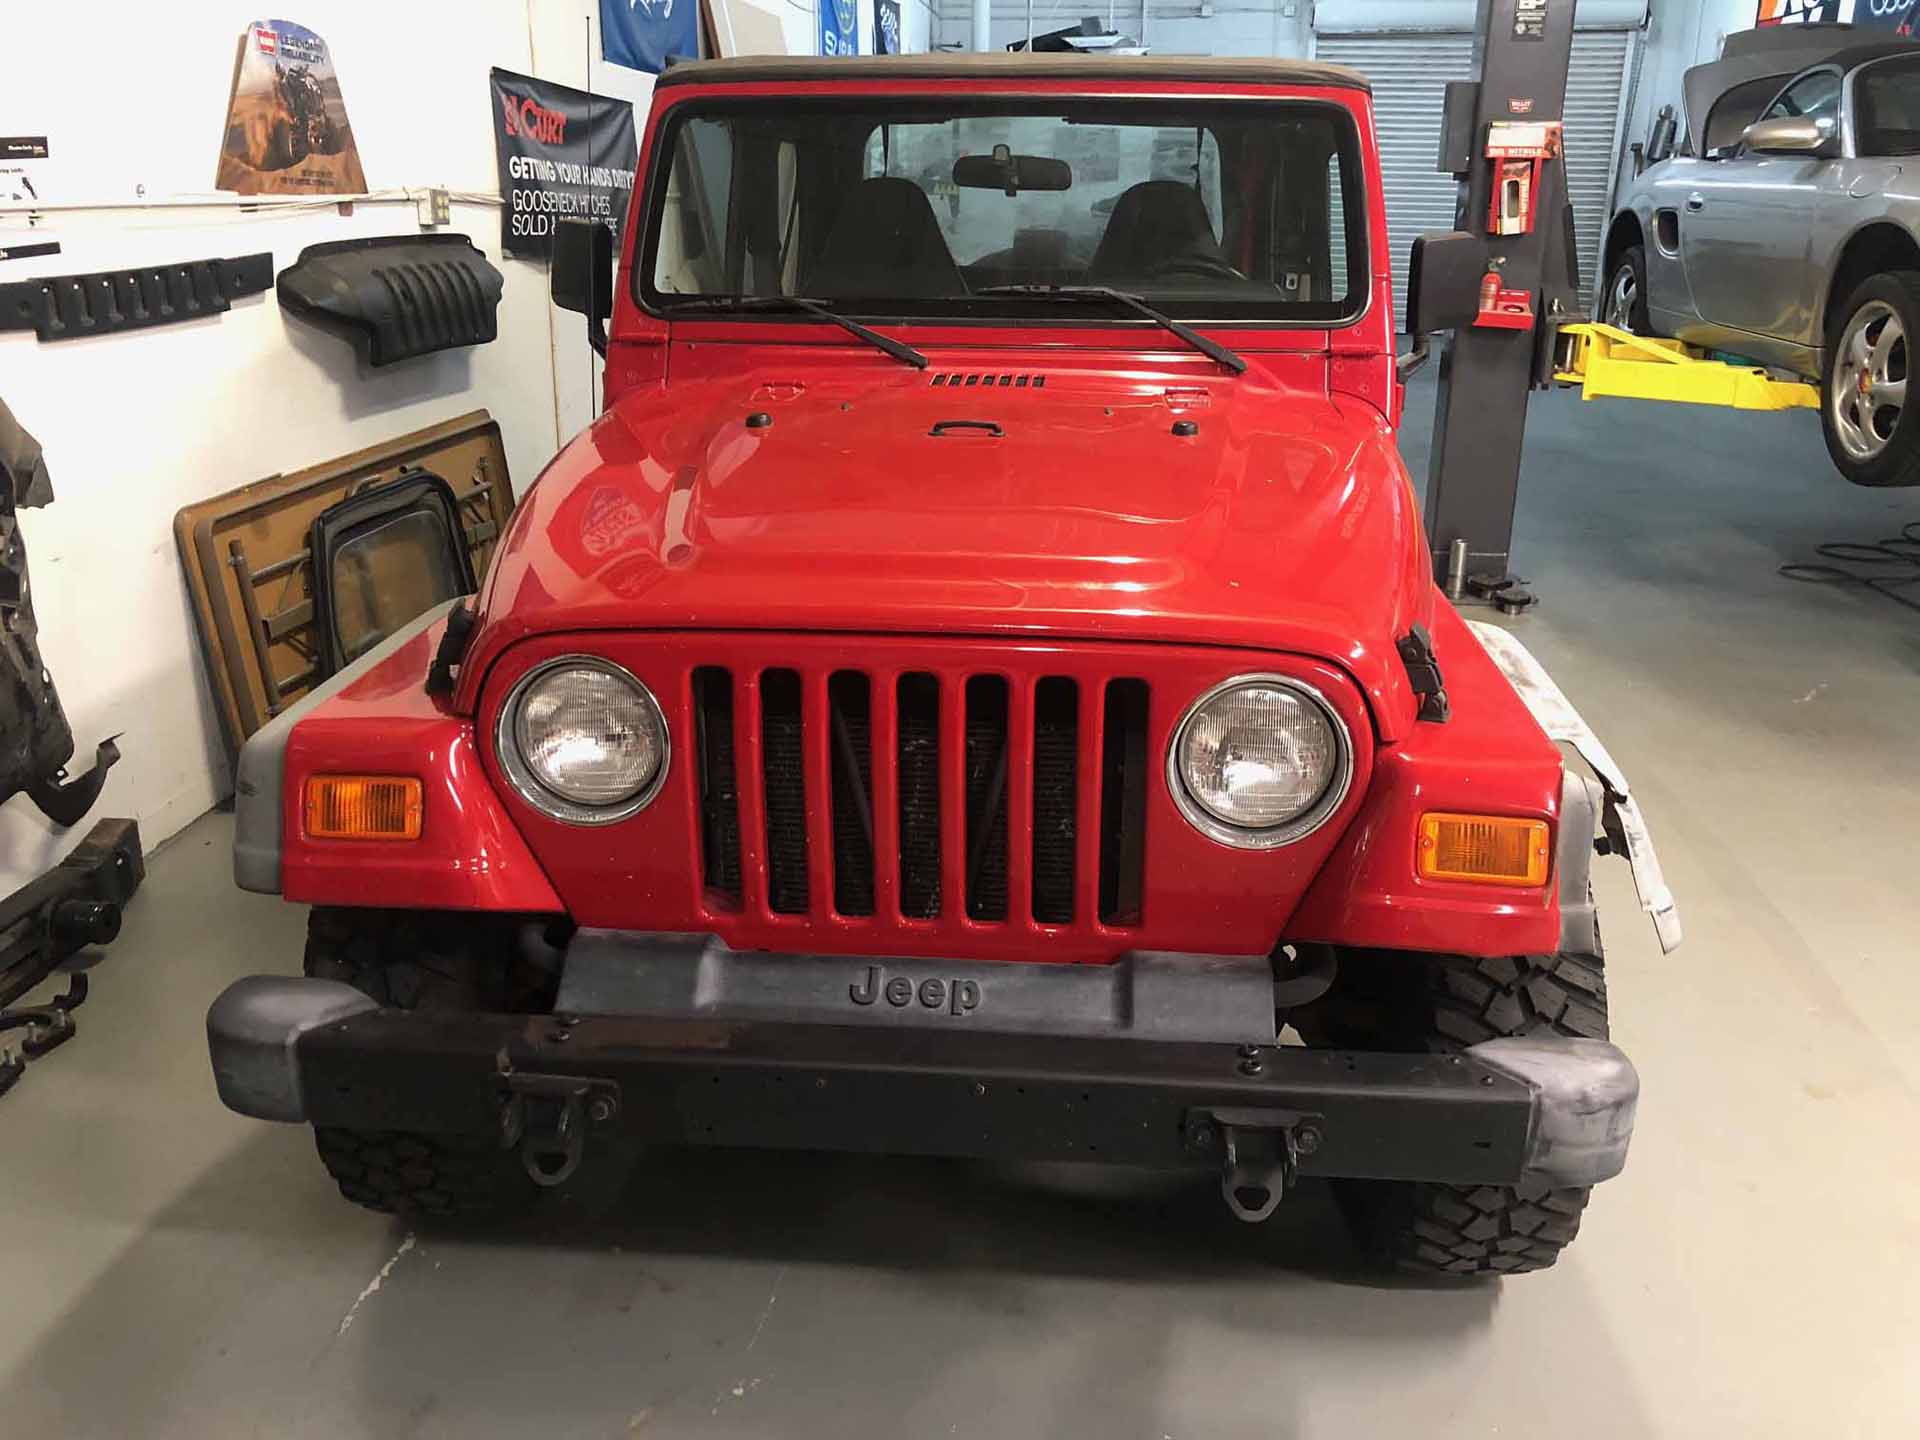 Jeep 2001 Red Before front